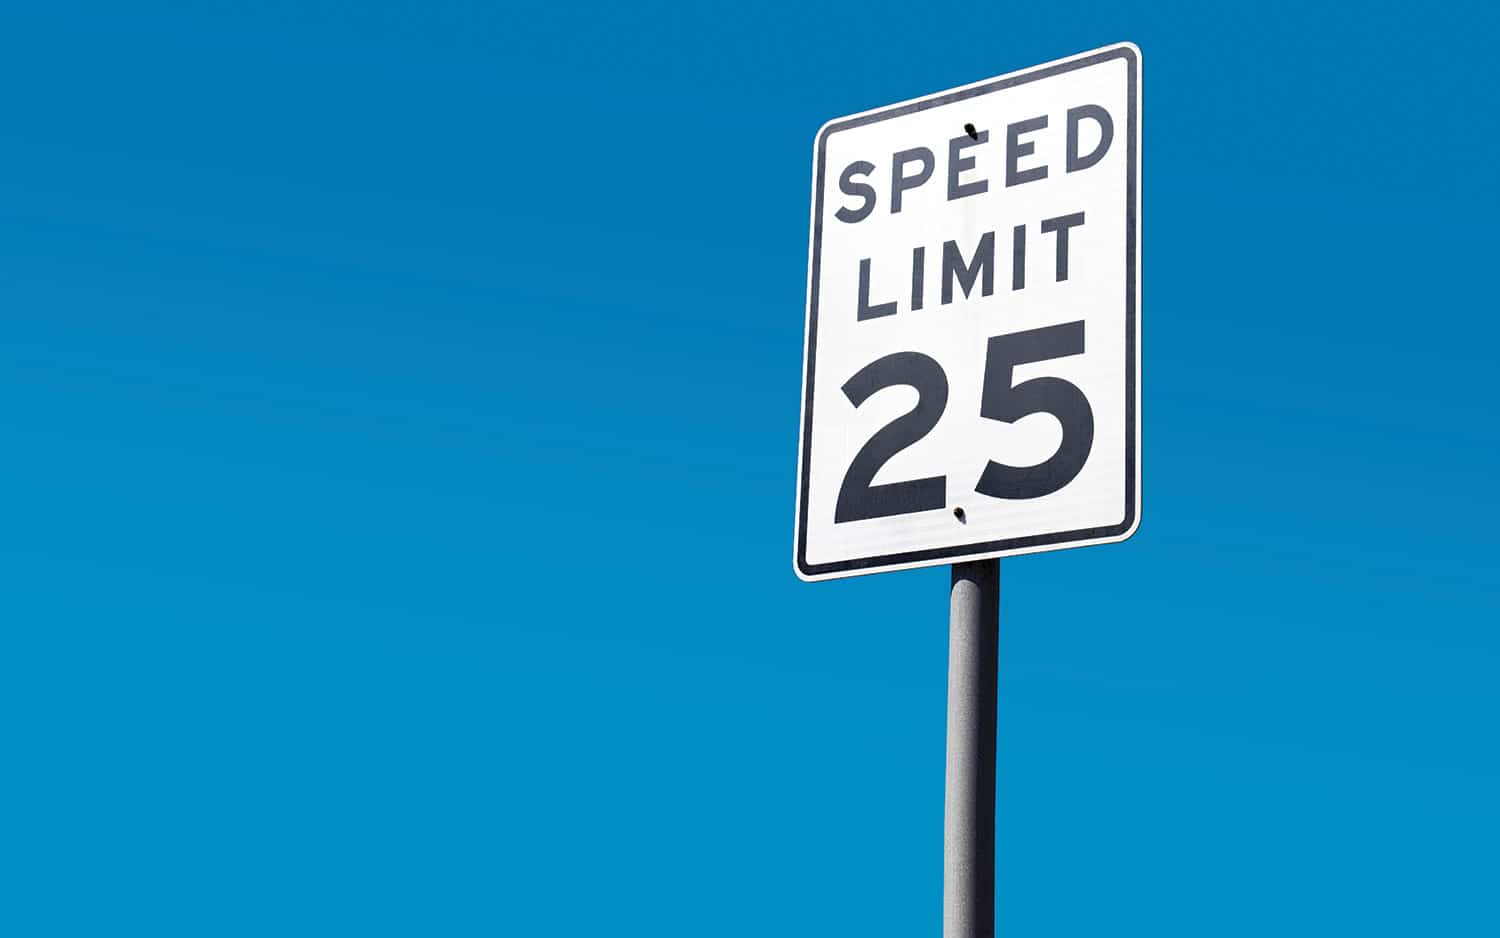 A "speed limit 25" sign against a clear blue sky.